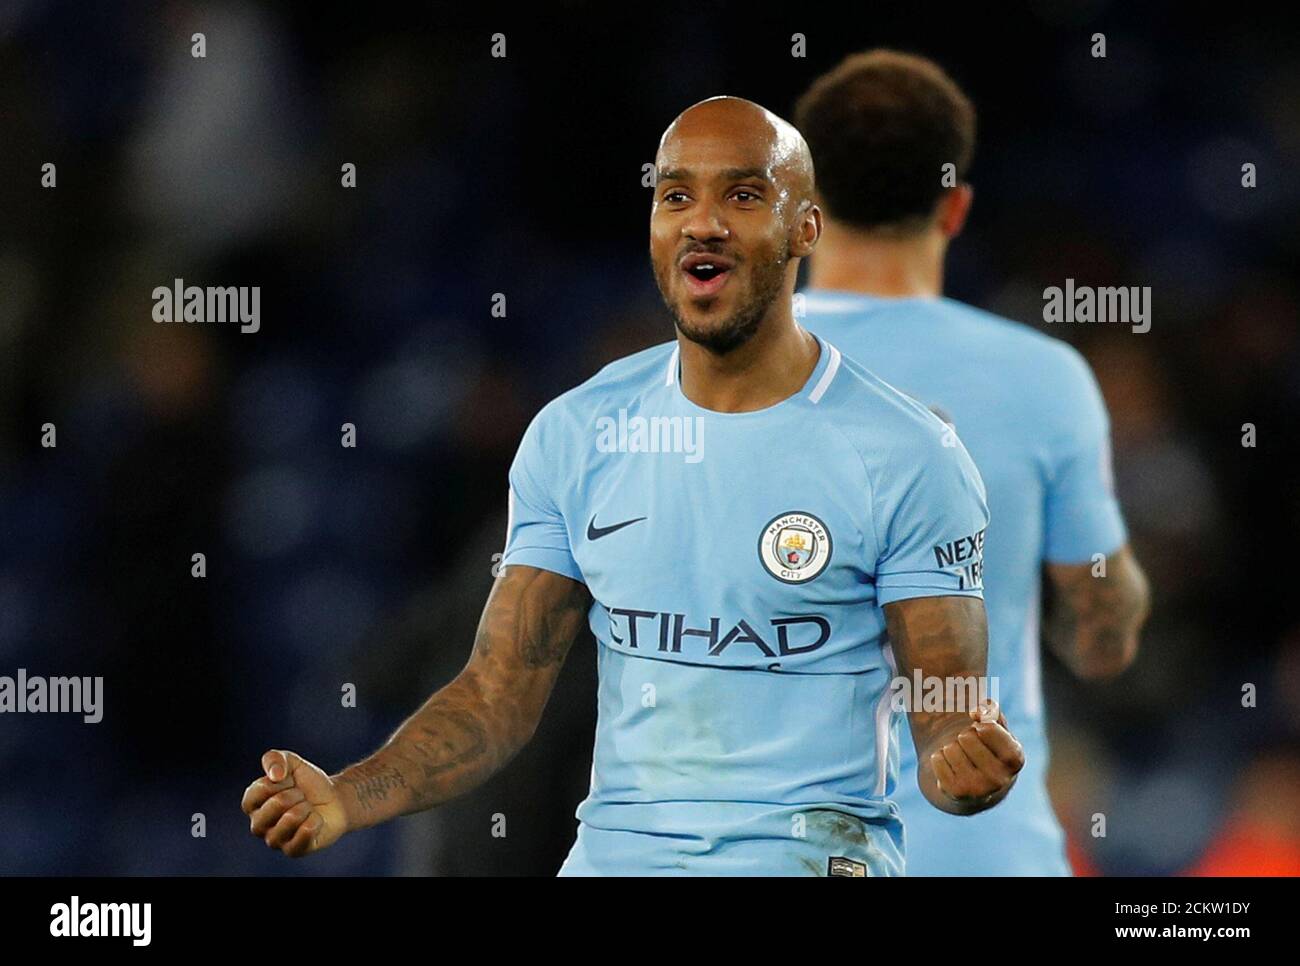 Soccer Football - Premier League - Leicester City vs Manchester City - King Power Stadium, Leicester, Britain - November 18, 2017   Manchester City's Fabian Delph celebrates after the match                 REUTERS/Darren Staples    EDITORIAL USE ONLY. No use with unauthorized audio, video, data, fixture lists, club/league logos or 'live' services. Online in-match use limited to 75 images, no video emulation. No use in betting, games or single club/league/player publications. Please contact your account representative for further details. Stock Photo